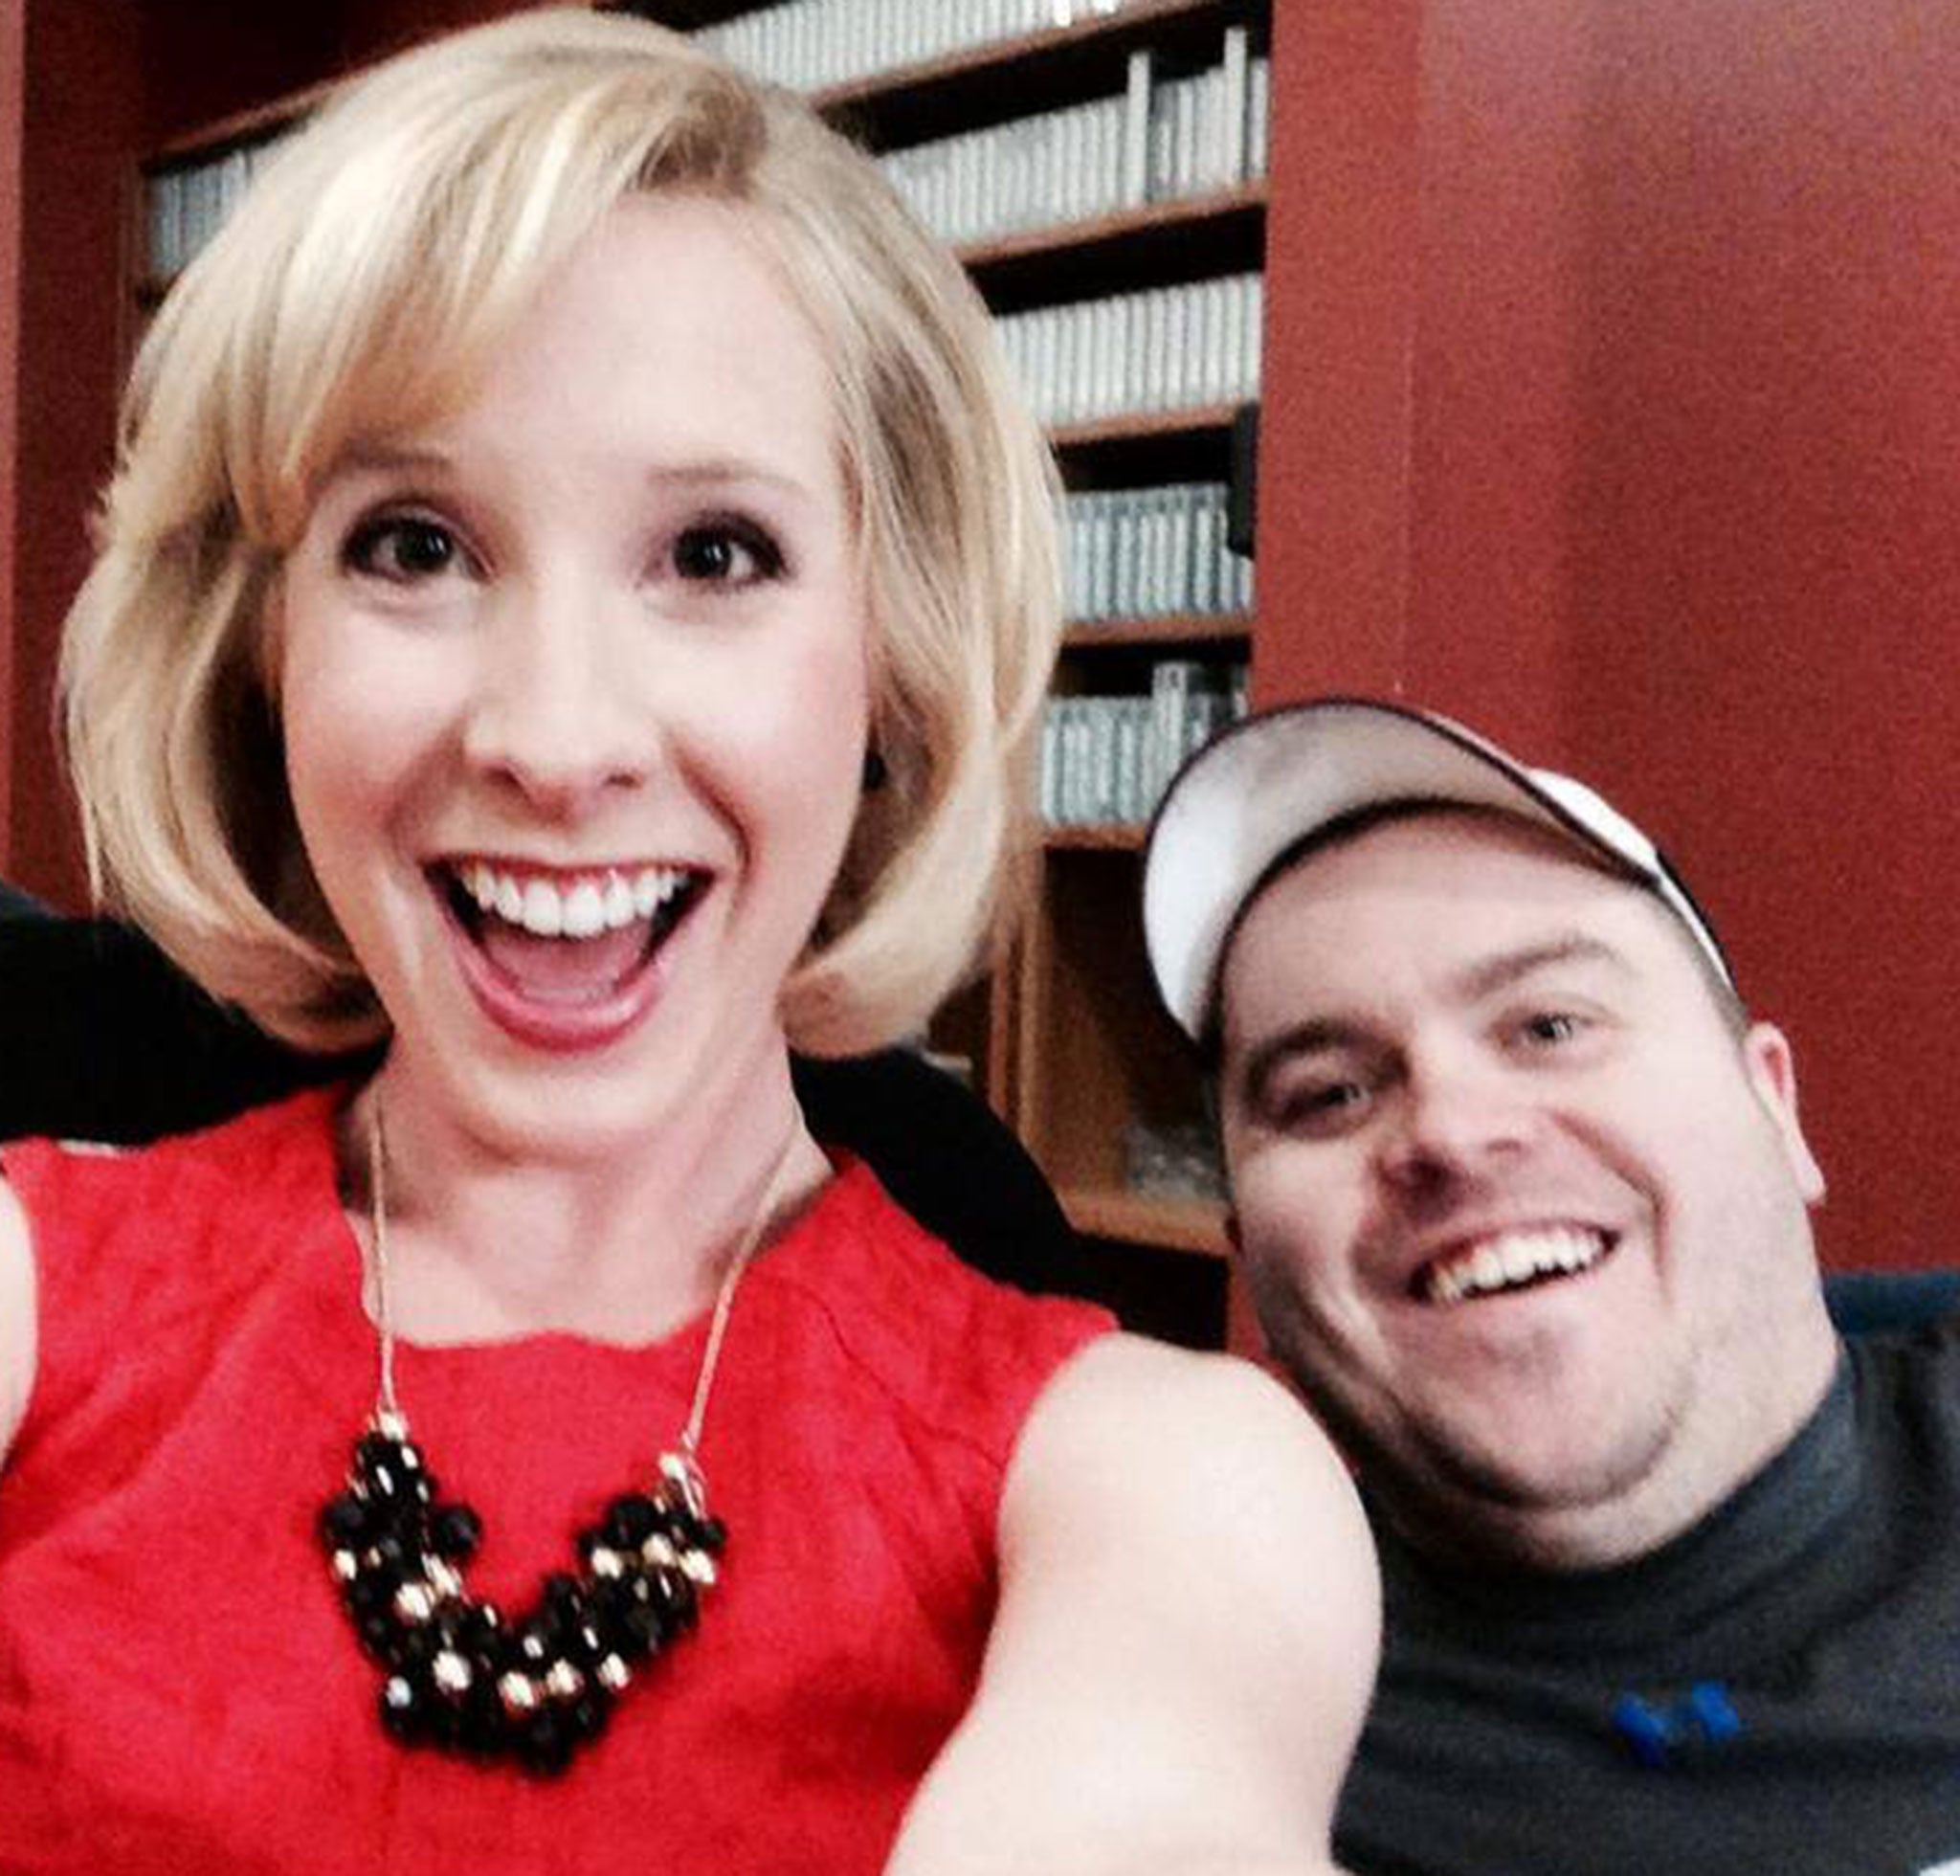 Journalists Alison Parker and Adam Ward, who were killed after a gunman opened fire during a live broadcast in Virginia